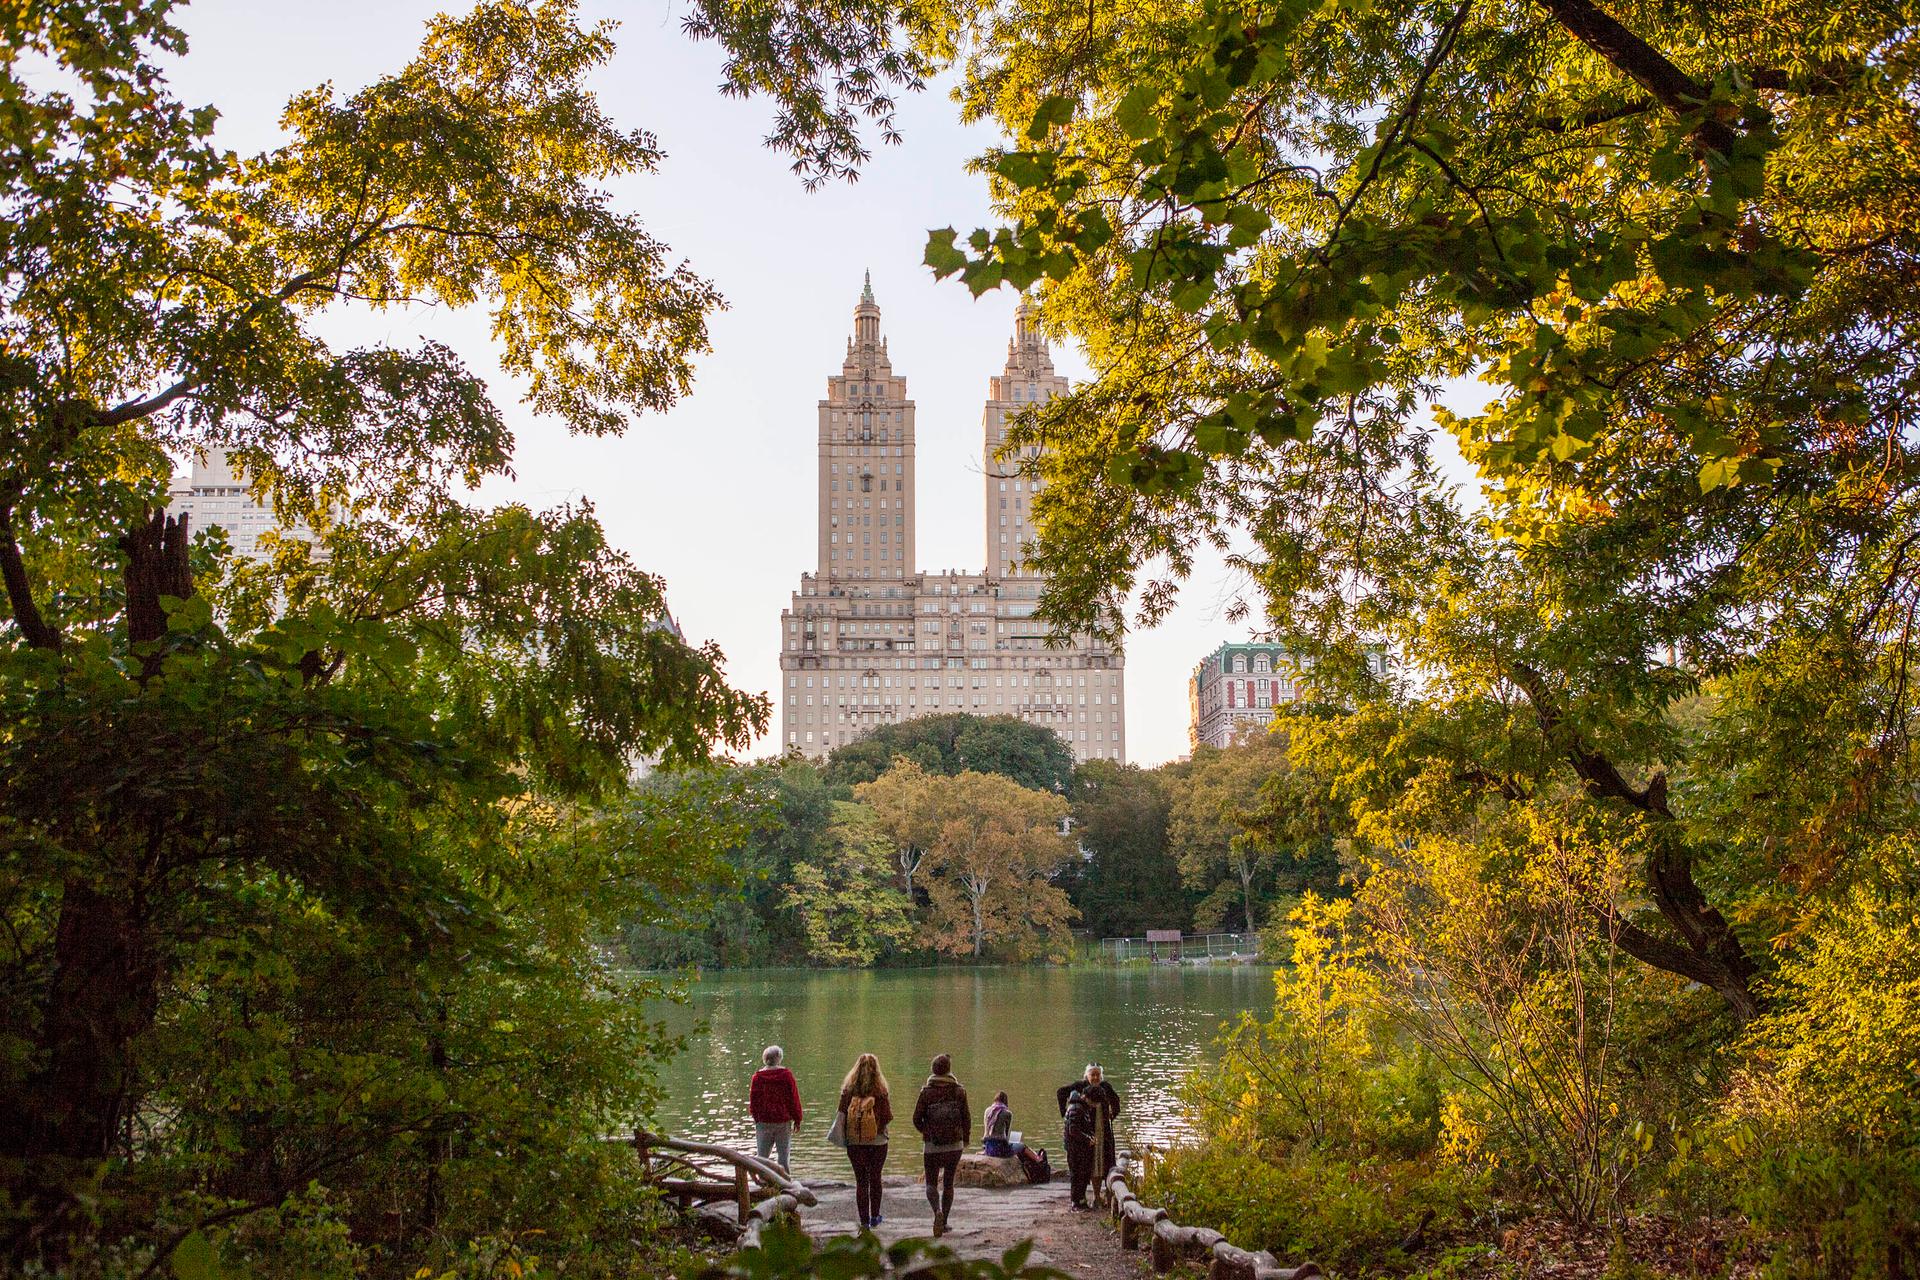 People enjoying the lake viewing area of Central Park, in Manhattan